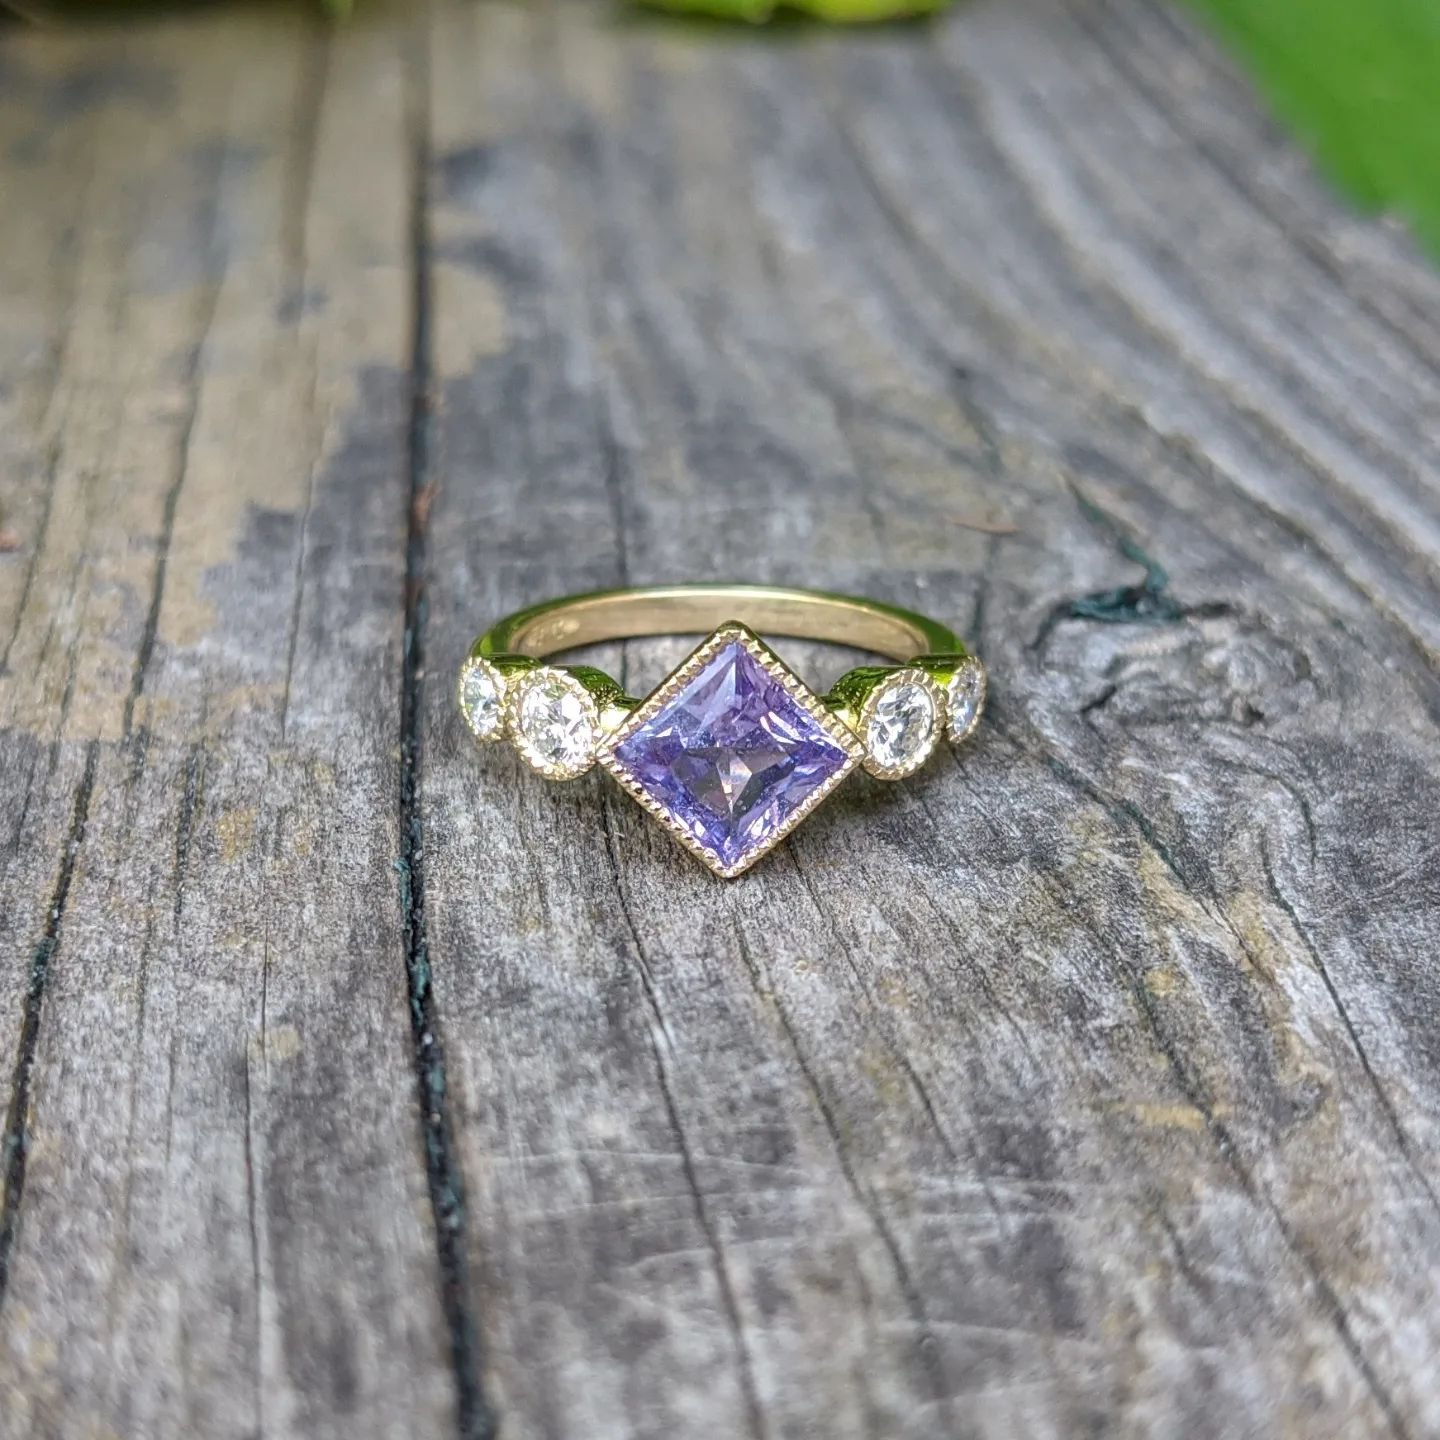 I have lots of fun sapphire rings in the world right now. Here's a throwback to a purple sapphire ring I made in 2021. 
I love designing really special and unique rings for my clients. 
#engagementring #purplesapphire #sapphirering #sapphireengagemen